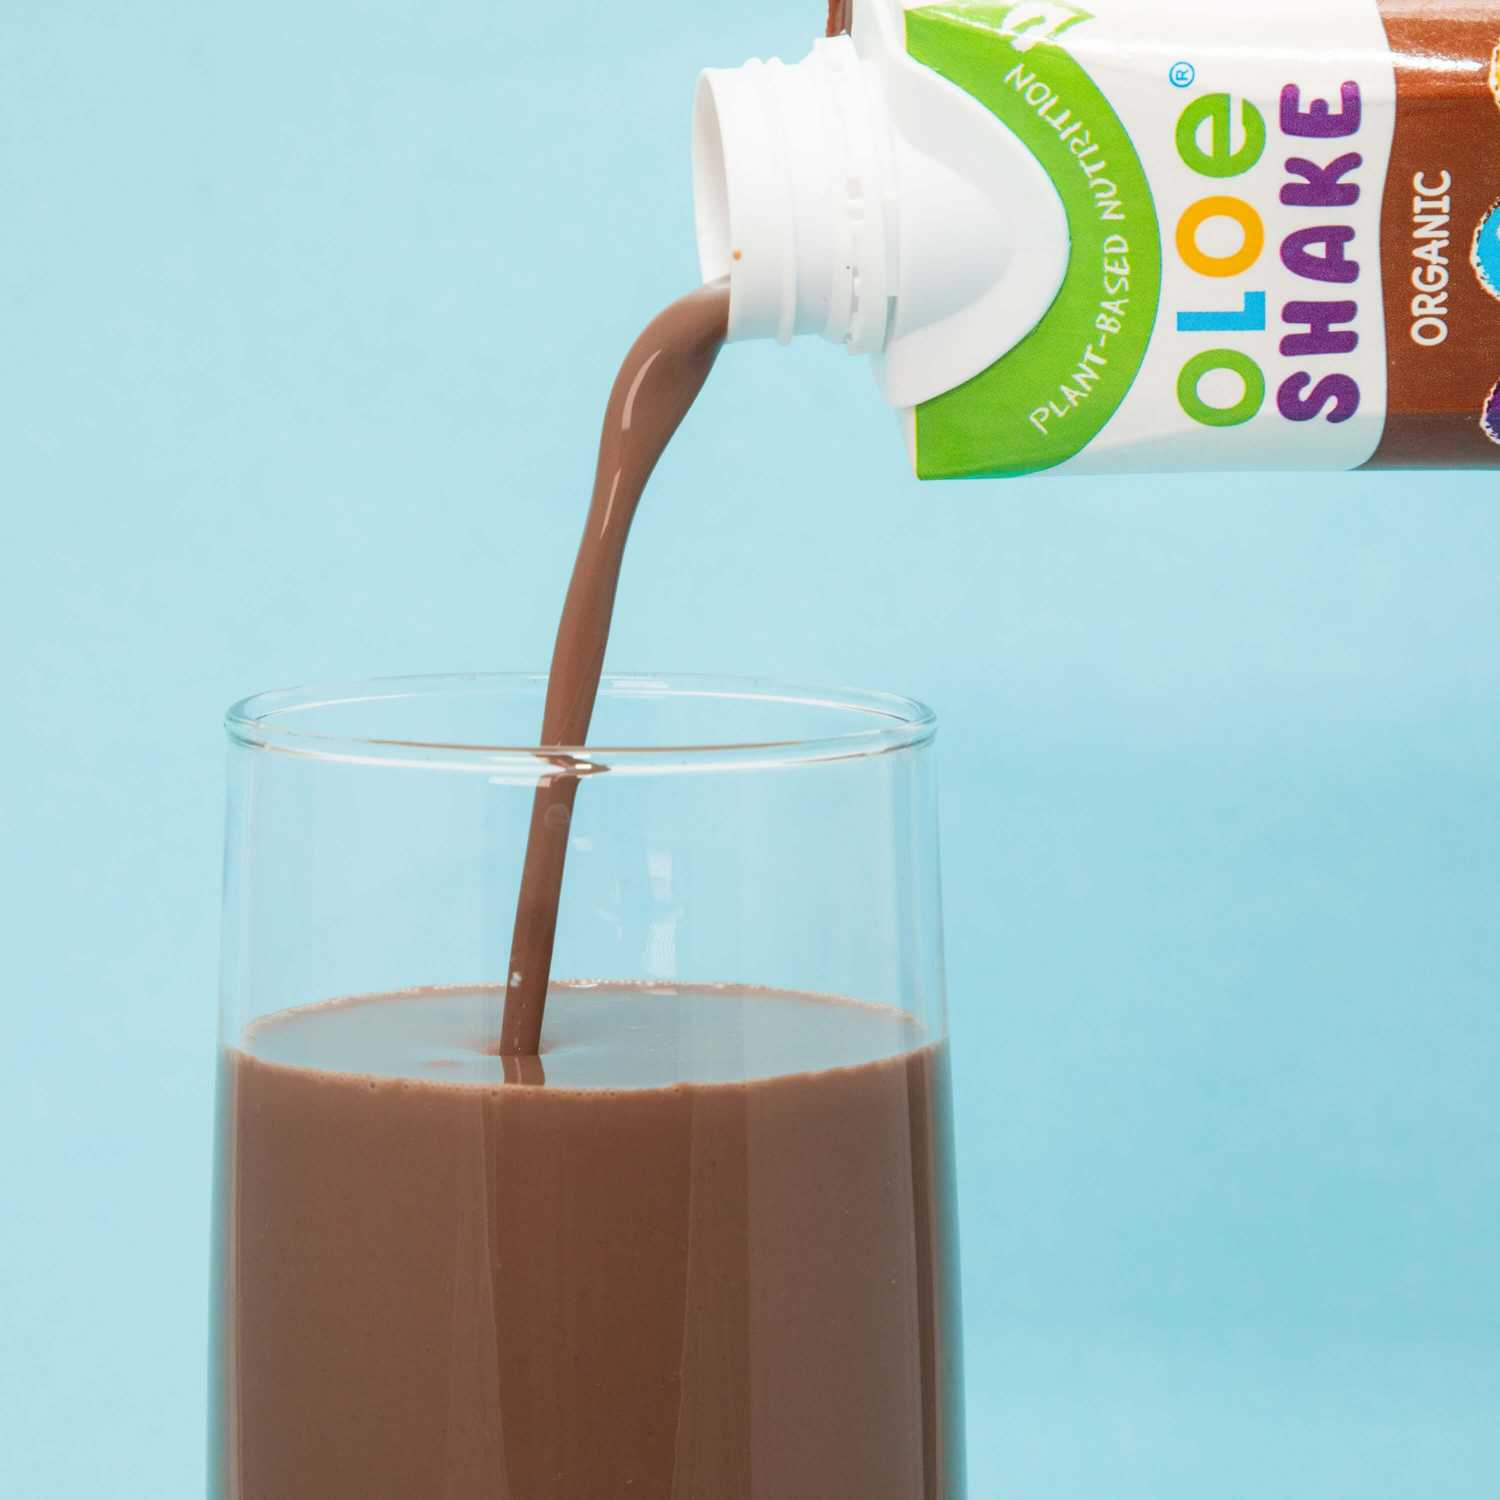 OLOE Shake - Curious Choc - Poured into a glass to show the velvety smooth texture